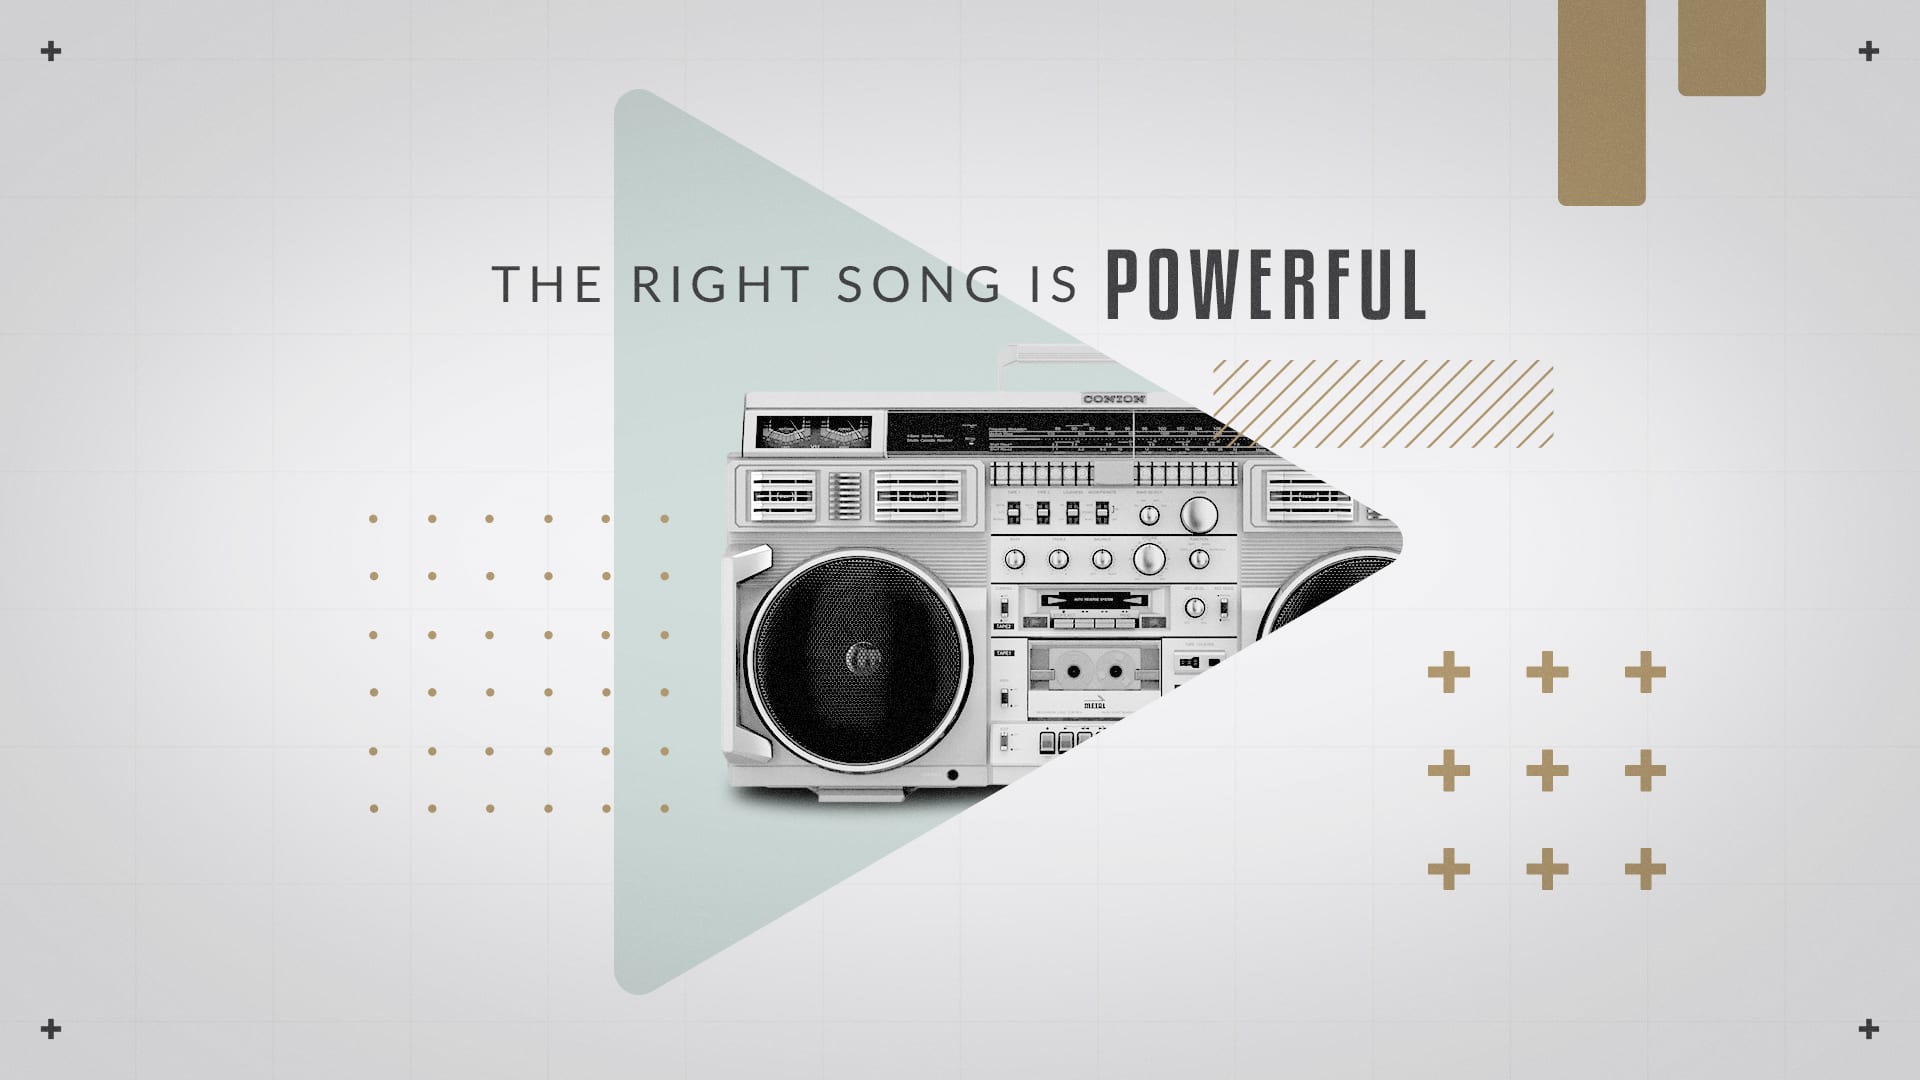 B01 – The right song